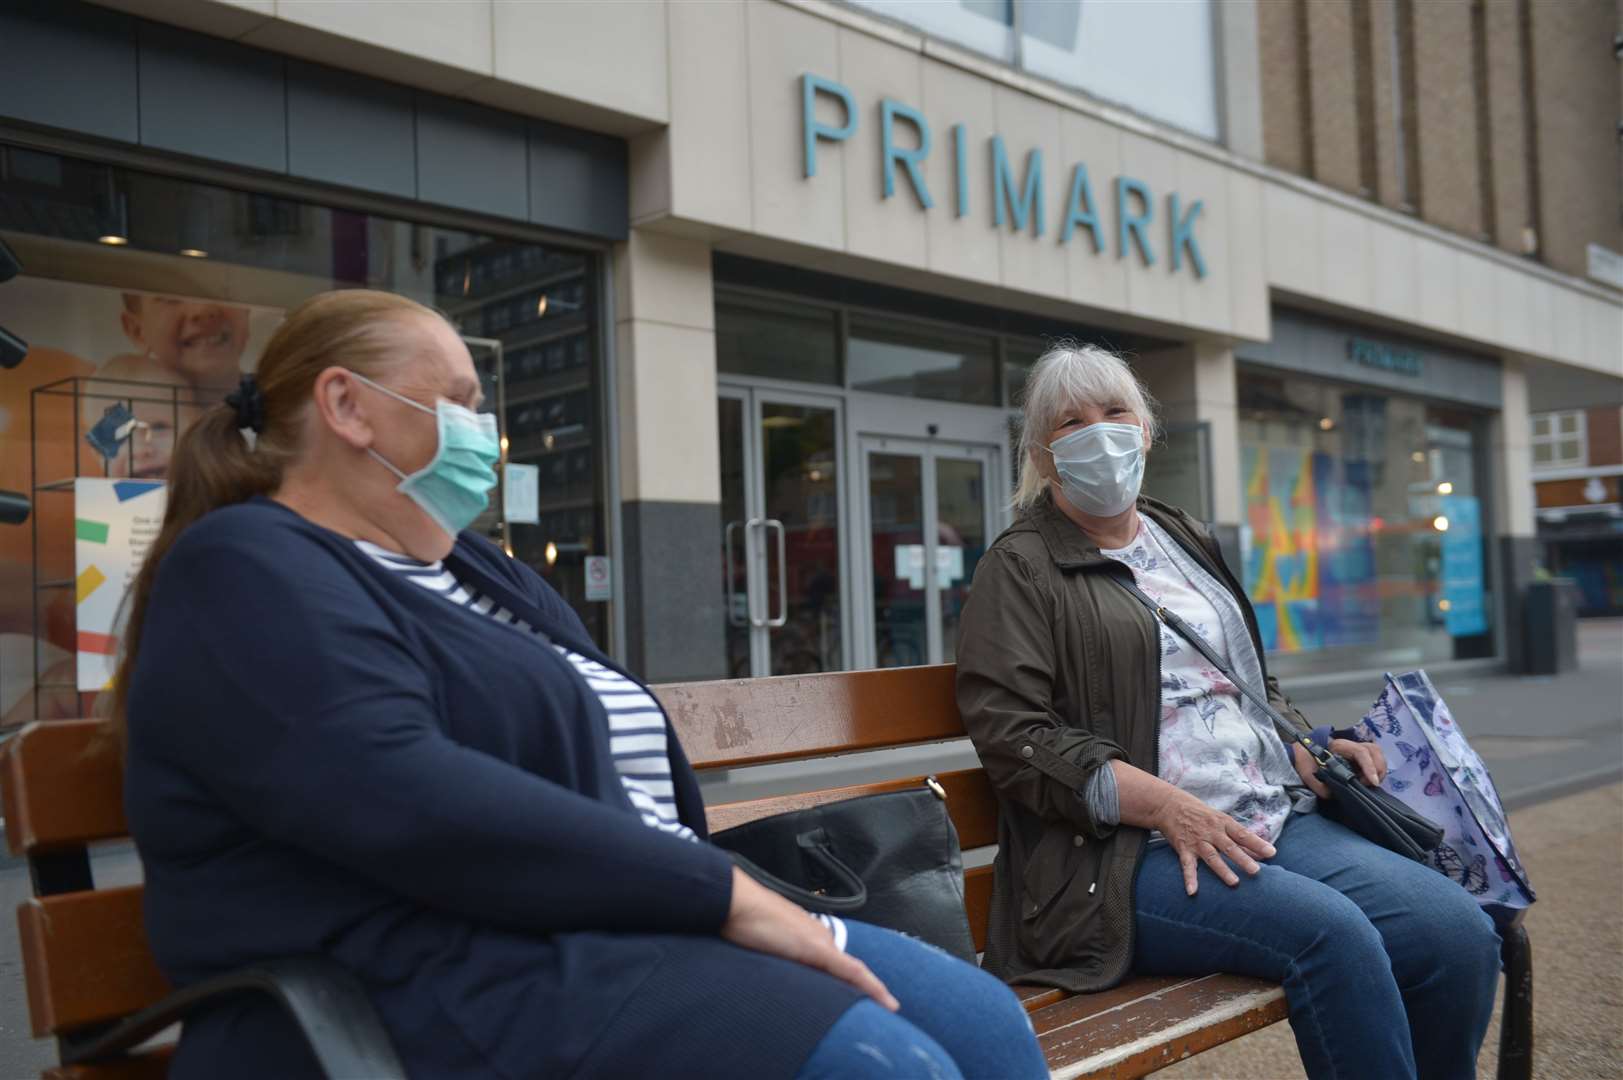 People wearing masks in Leicester city centre as face coverings become mandatory in shops and supermarkets in England. (Jacob King/PA)